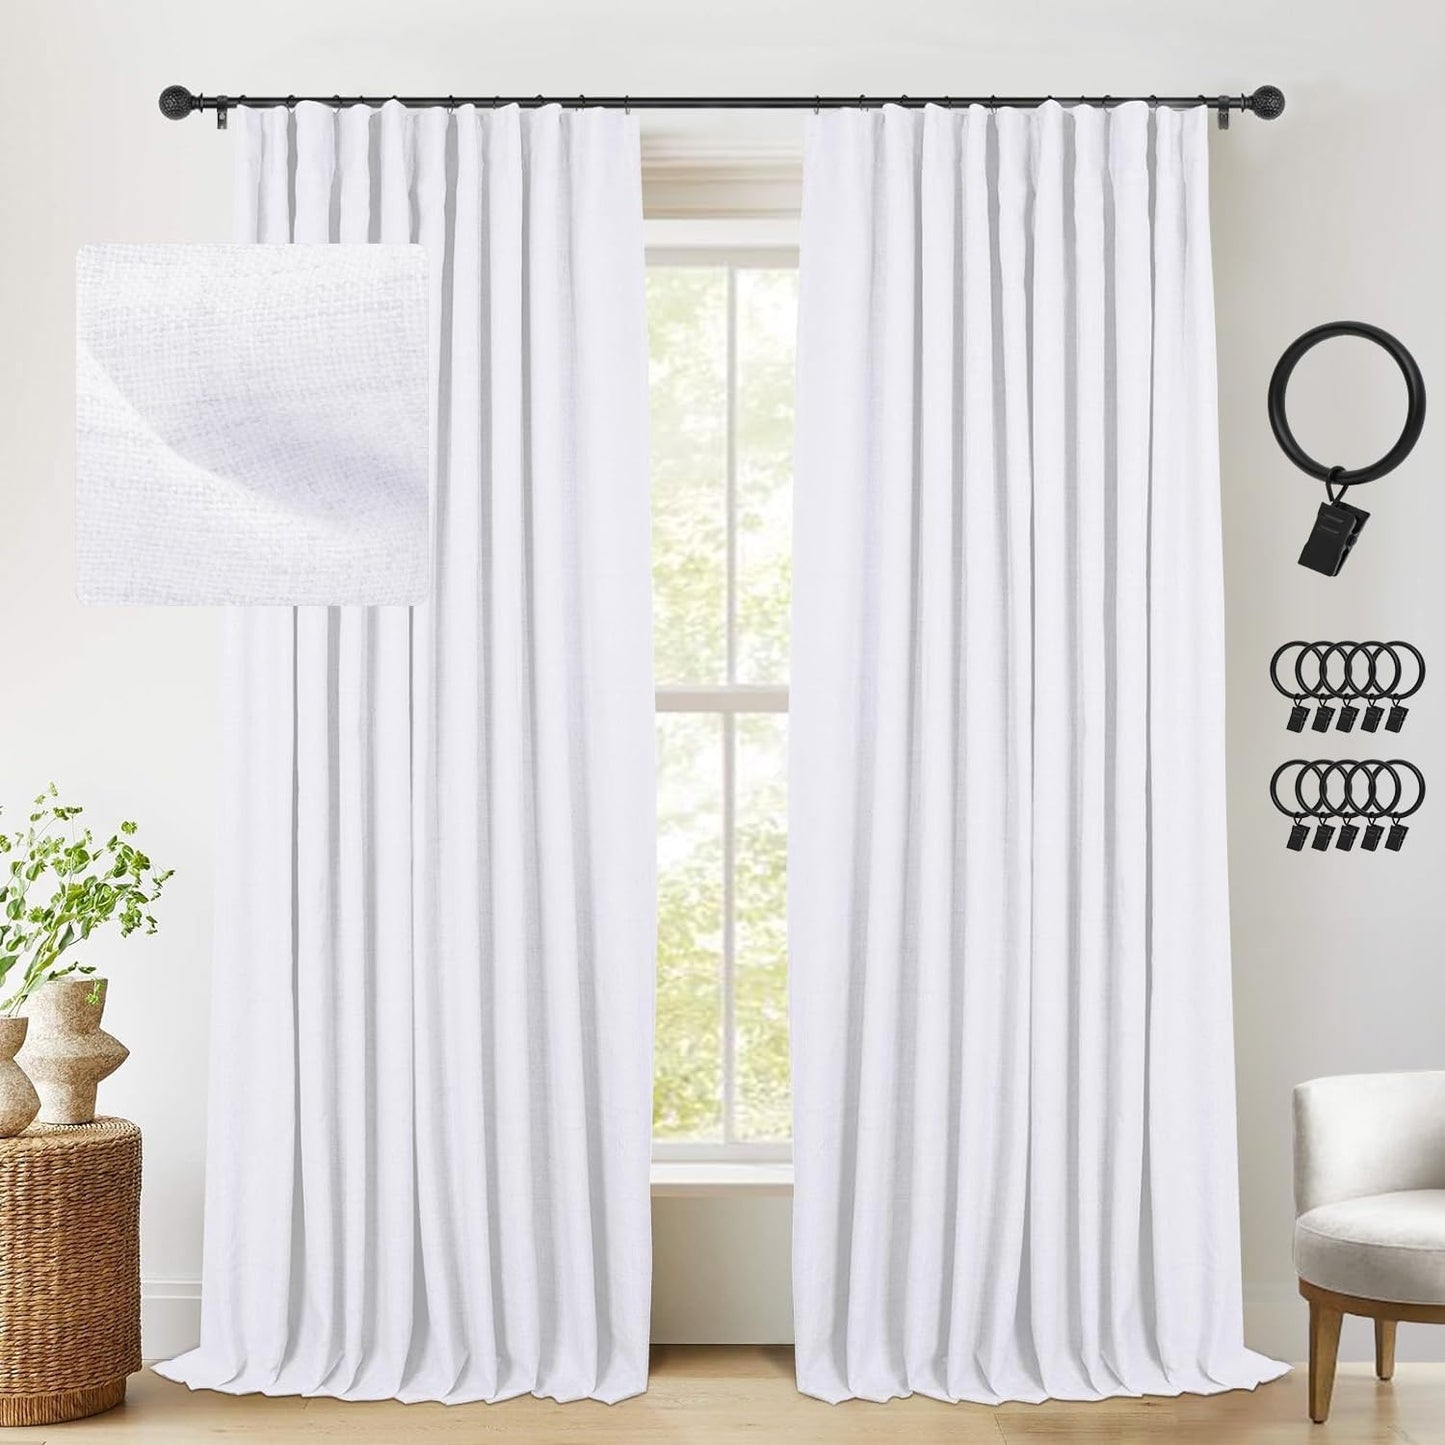 INOVADAY Thermal Sliding Door Curtains 100% Blackout Extra Wide for Patio, Linen Textured Farmhouse Glass Door Drapes (W100 X L84, 1 Panel, Beige)  INOVADAY Bright White 50"W X 108"L 